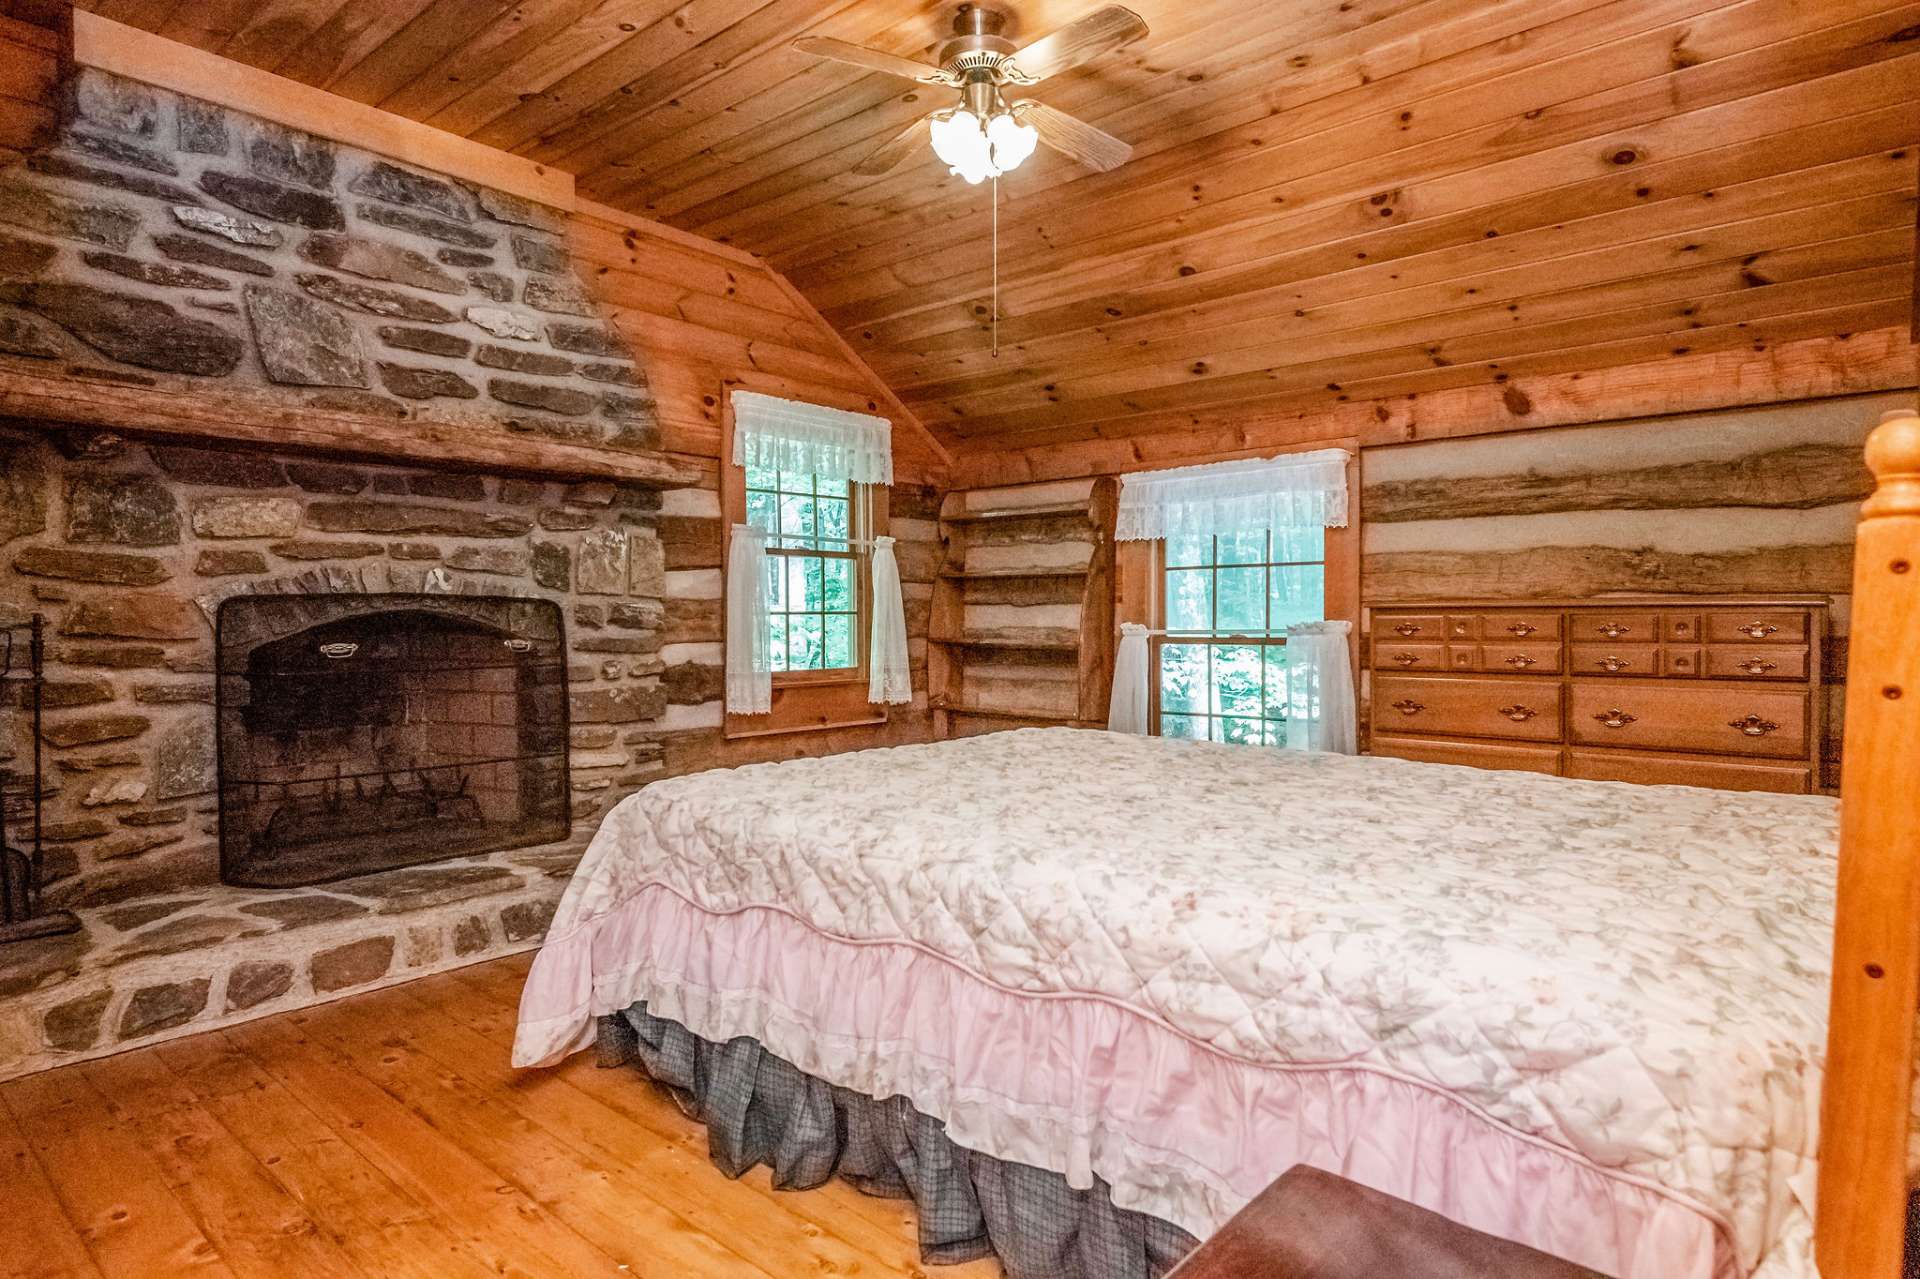 Upper level bedroom will excite your guests with this romantic fireplace.